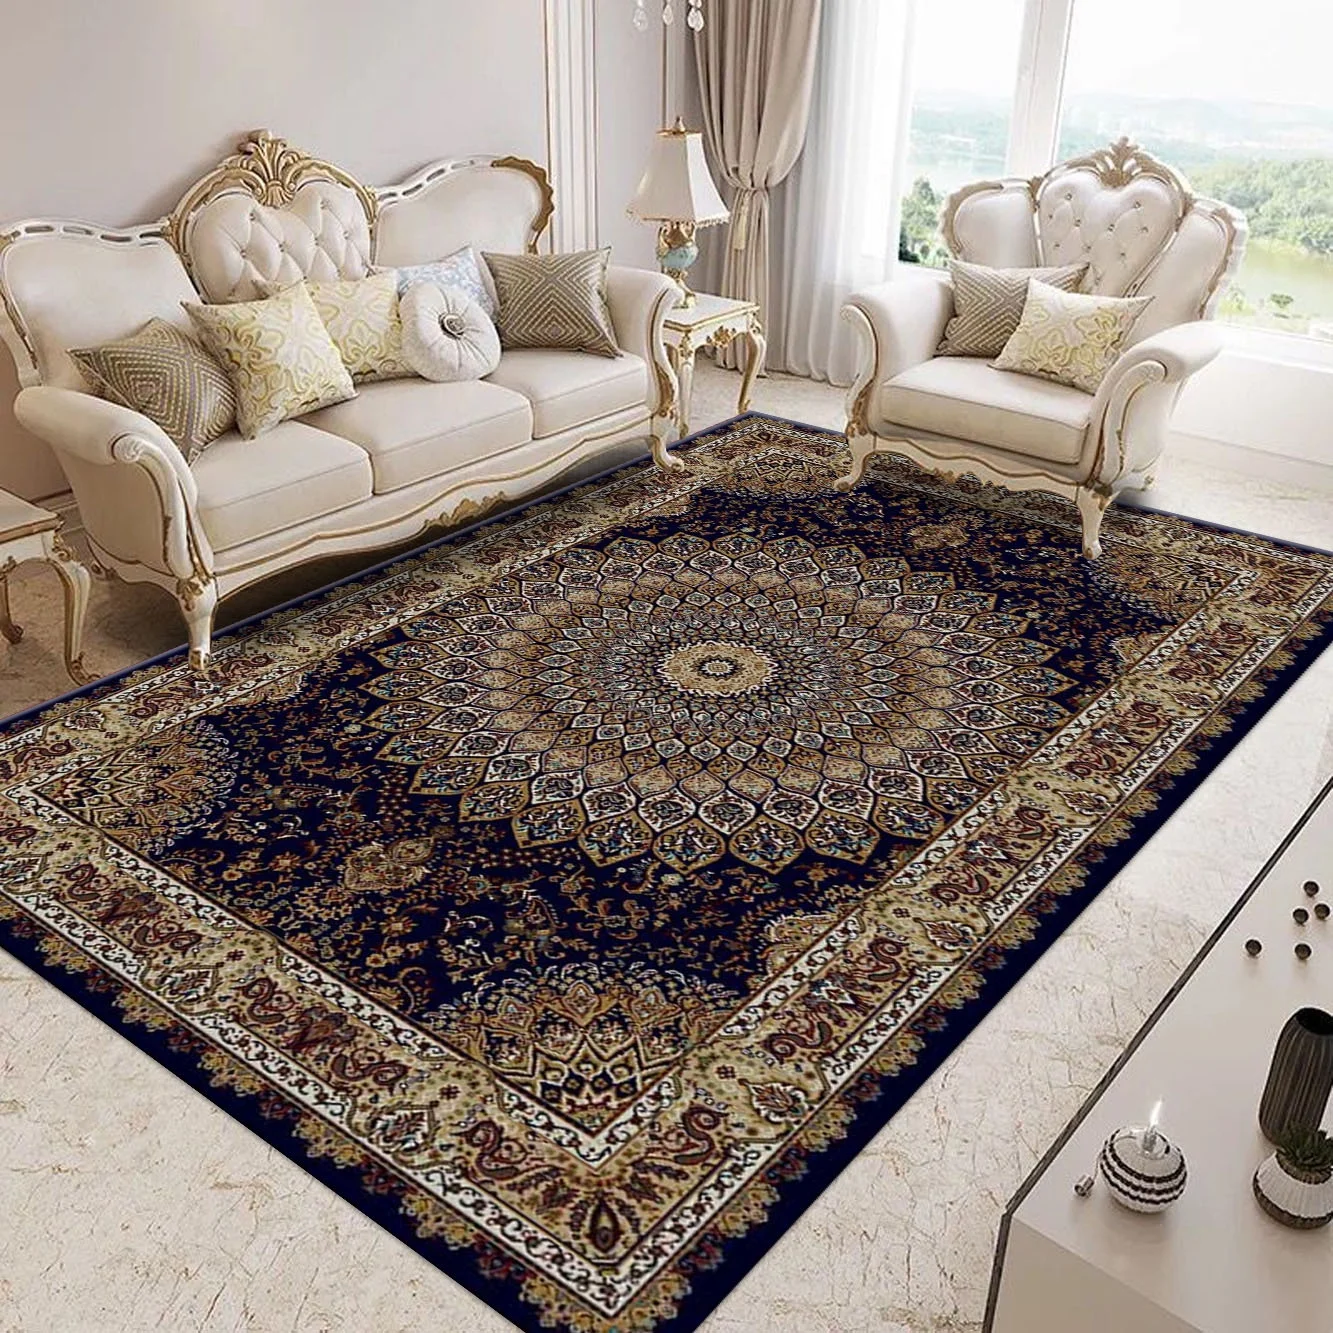 Big Carpet For Living Room For Whole Sale Carpet Rug - Buy Wholesale  Carpet,Carpet Rug,Luxury Living Room Carpet Product on